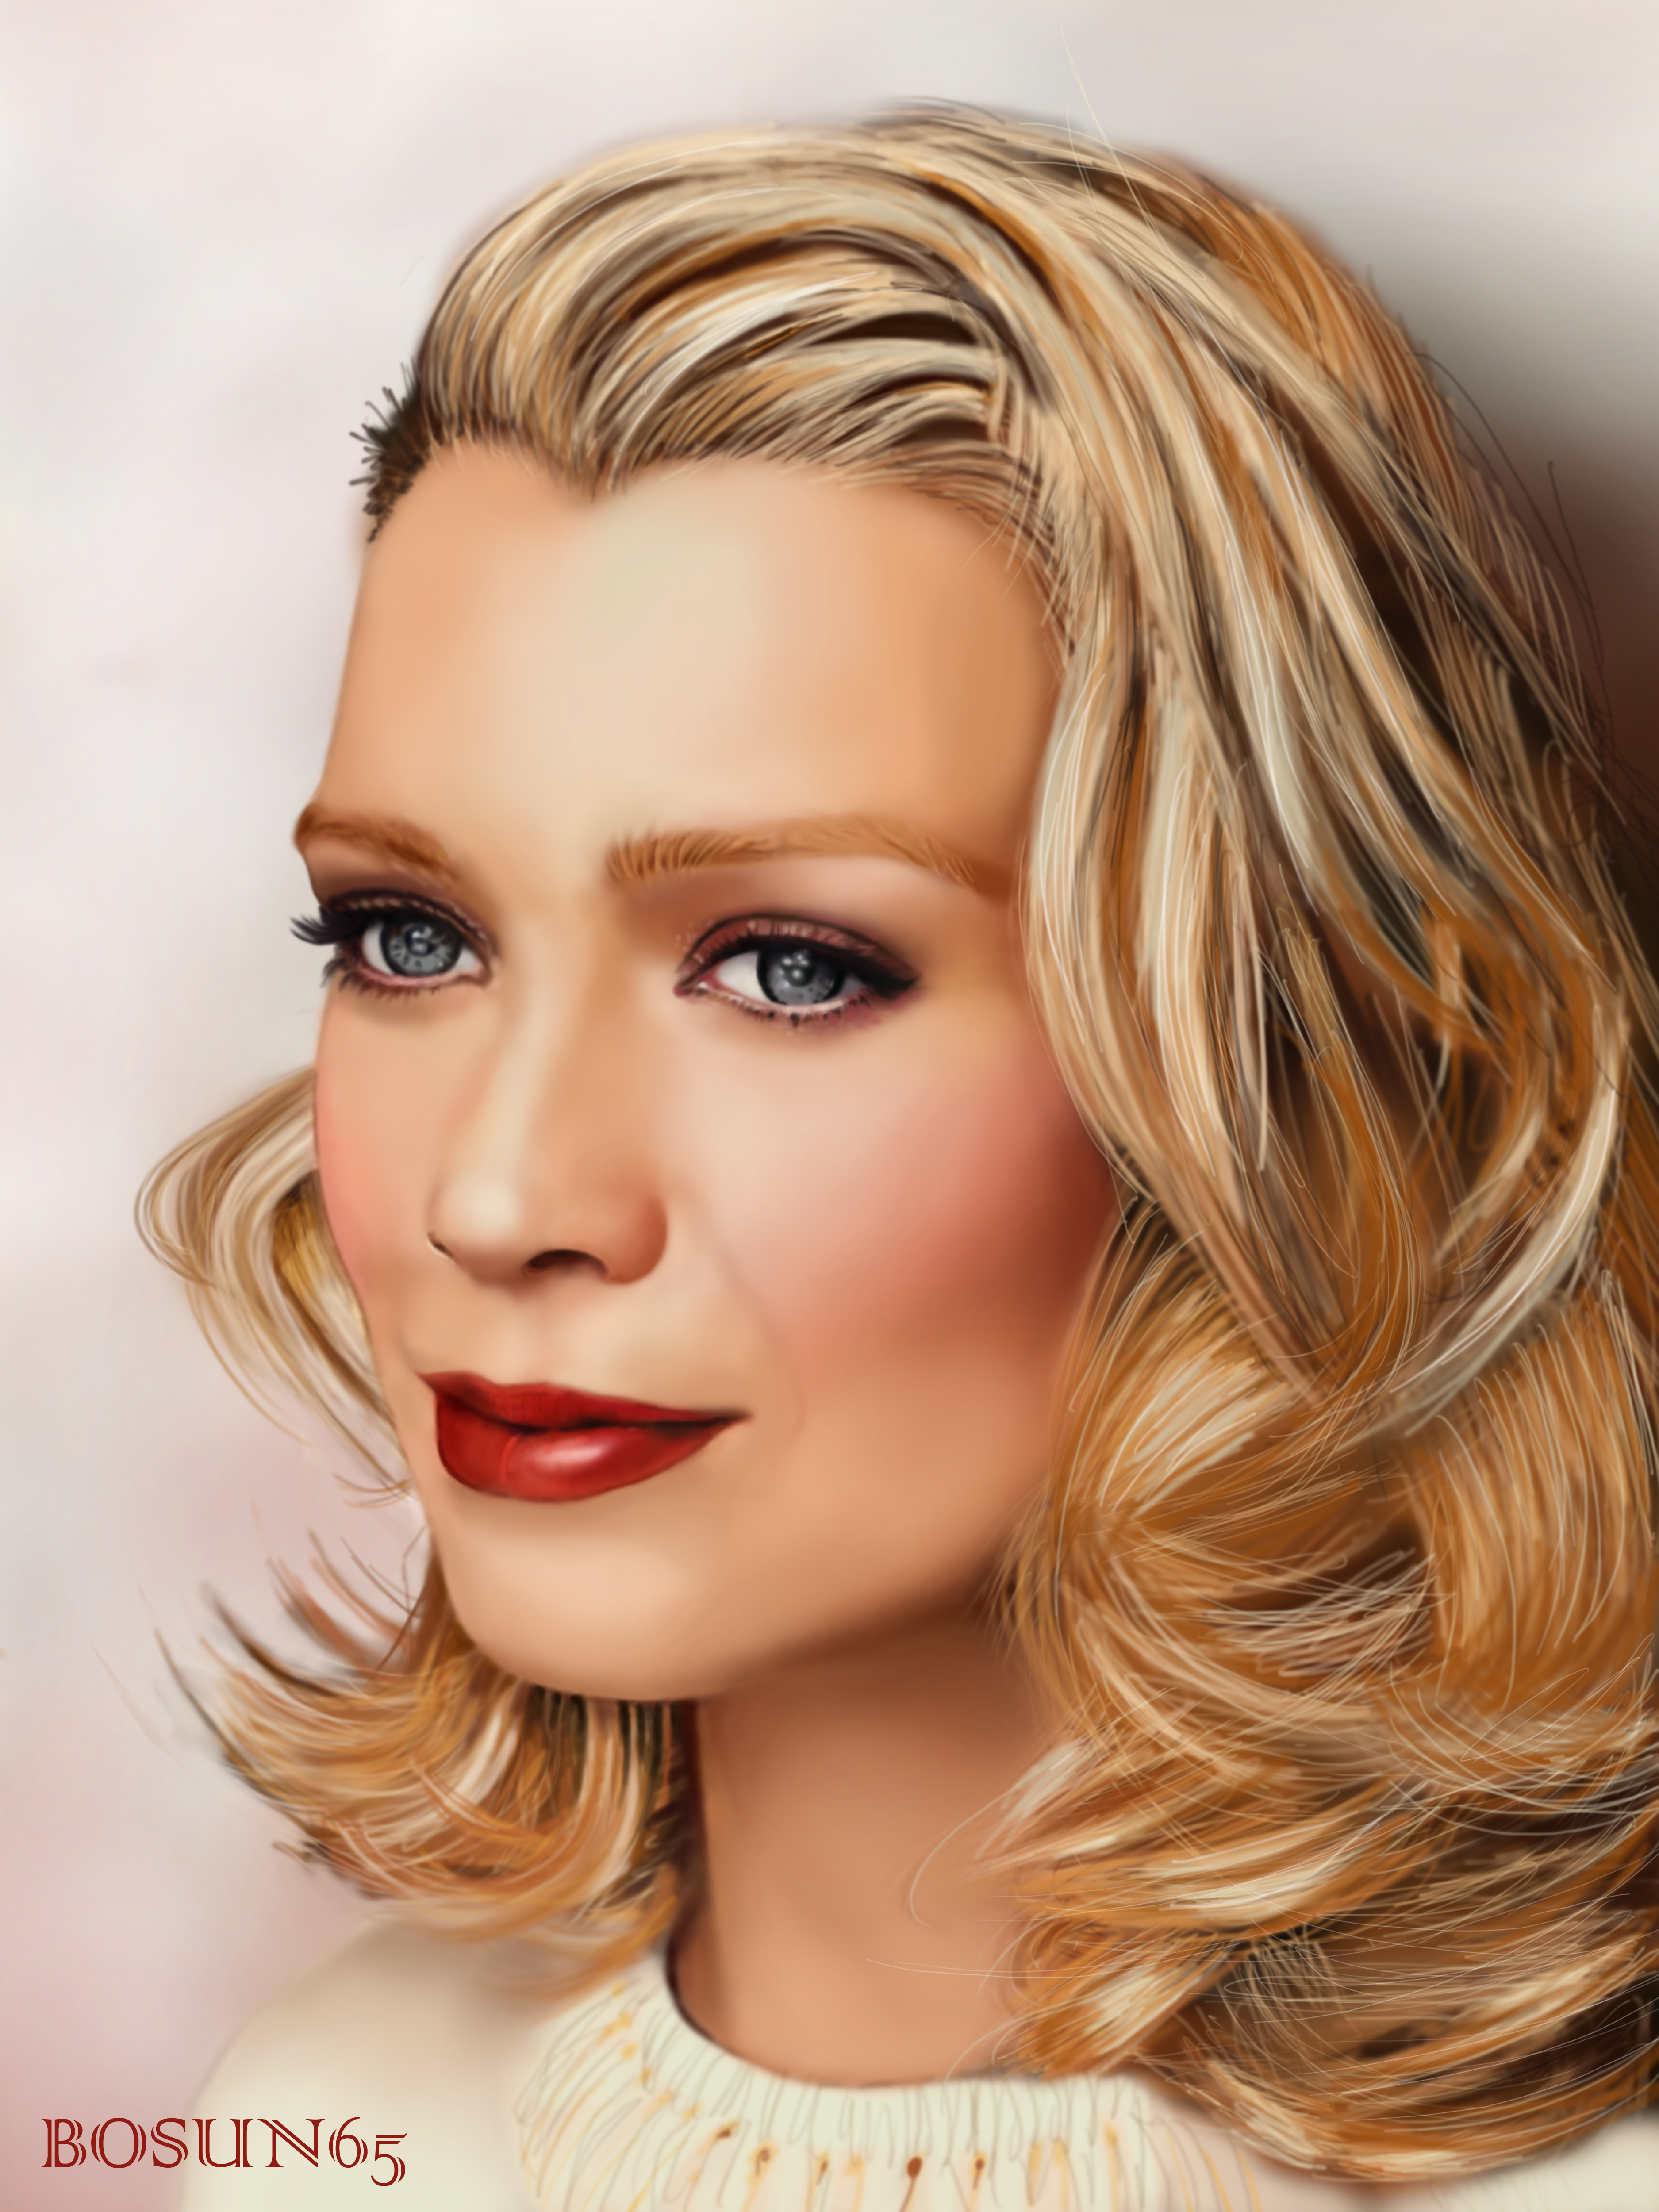 laurie-holden-wallpapers